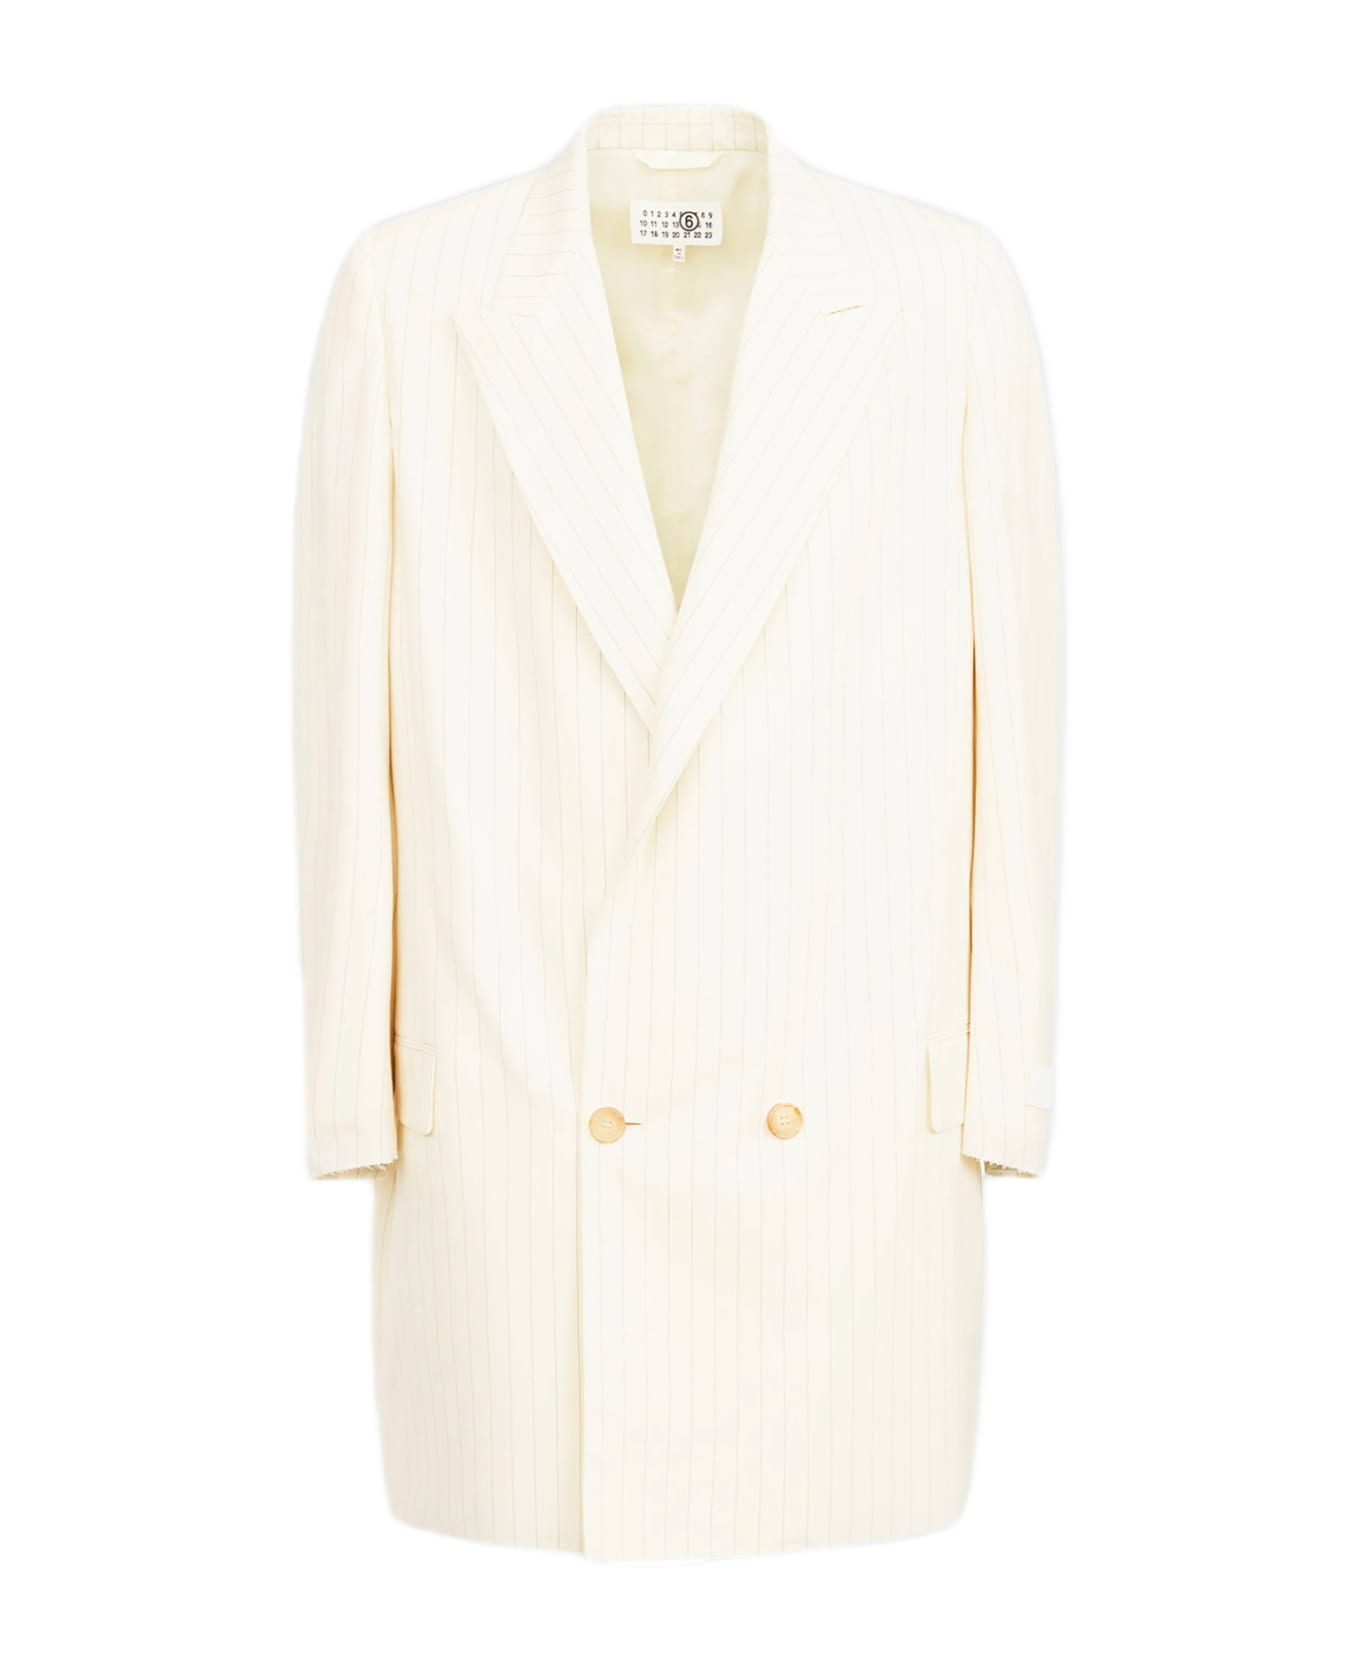 MM6 Maison Margiela Giacca Off white pinstriped long double-breated blazer - Panna コート